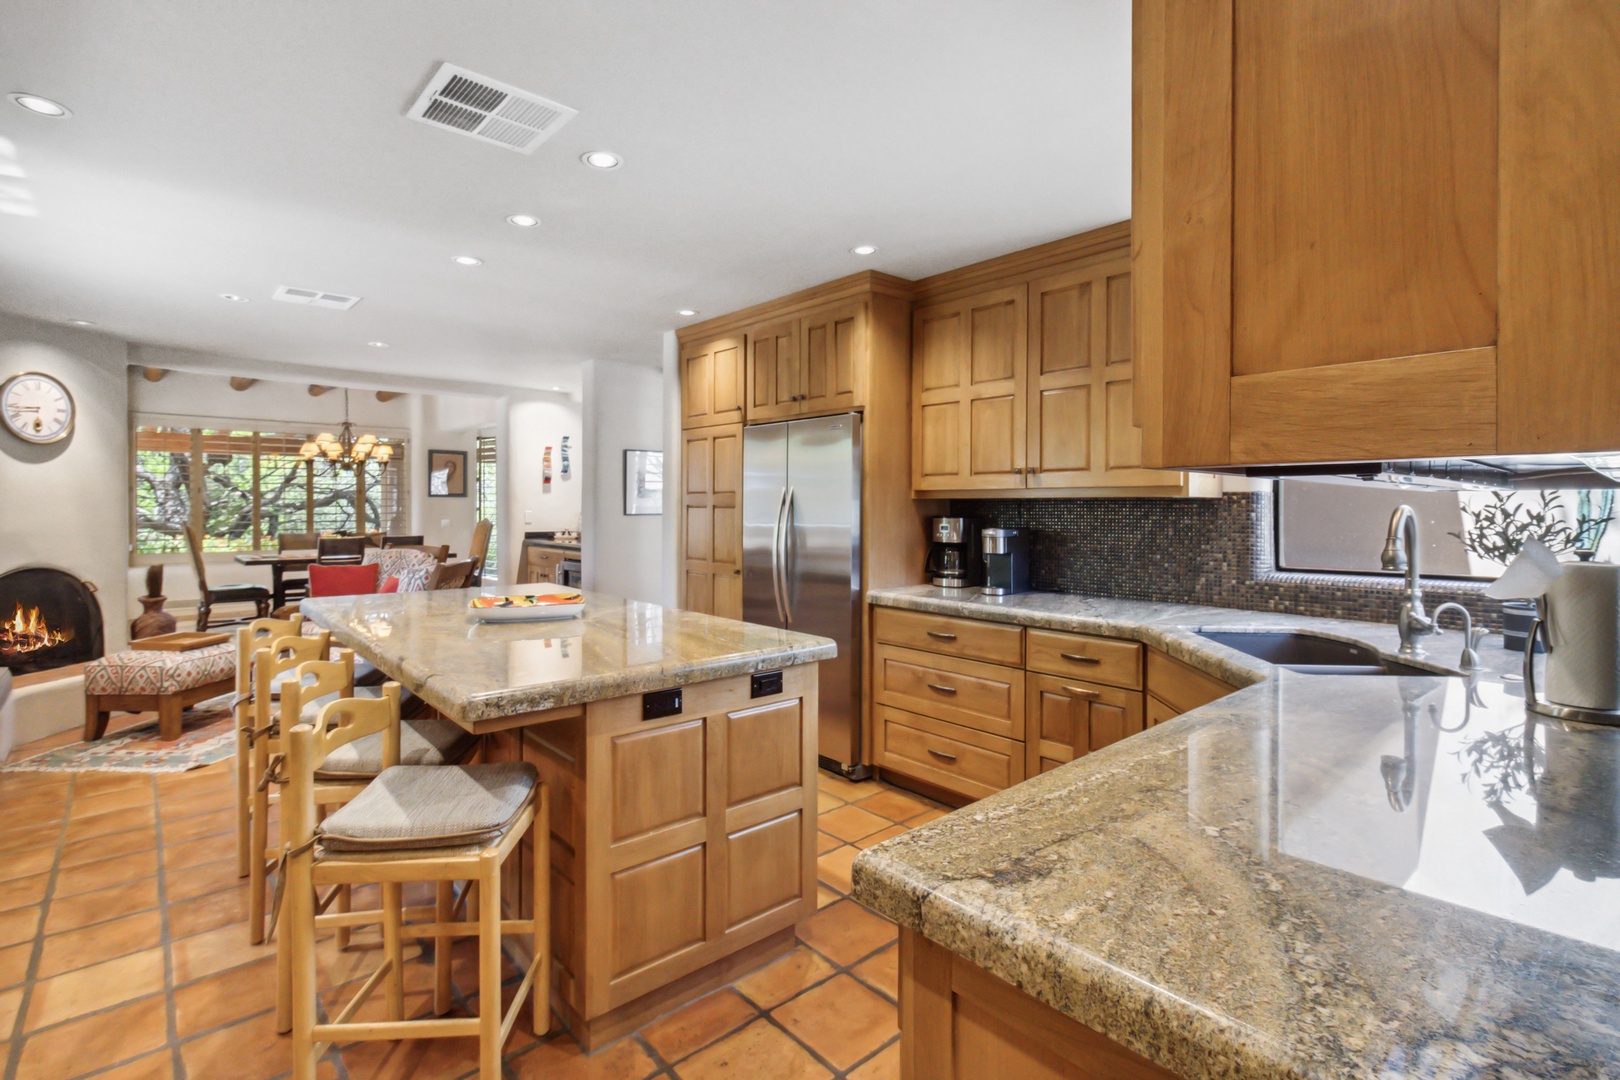 Scottsdale Vacation Rentals, Boulders Hideaway Villa - The kitchen includes everything you might need